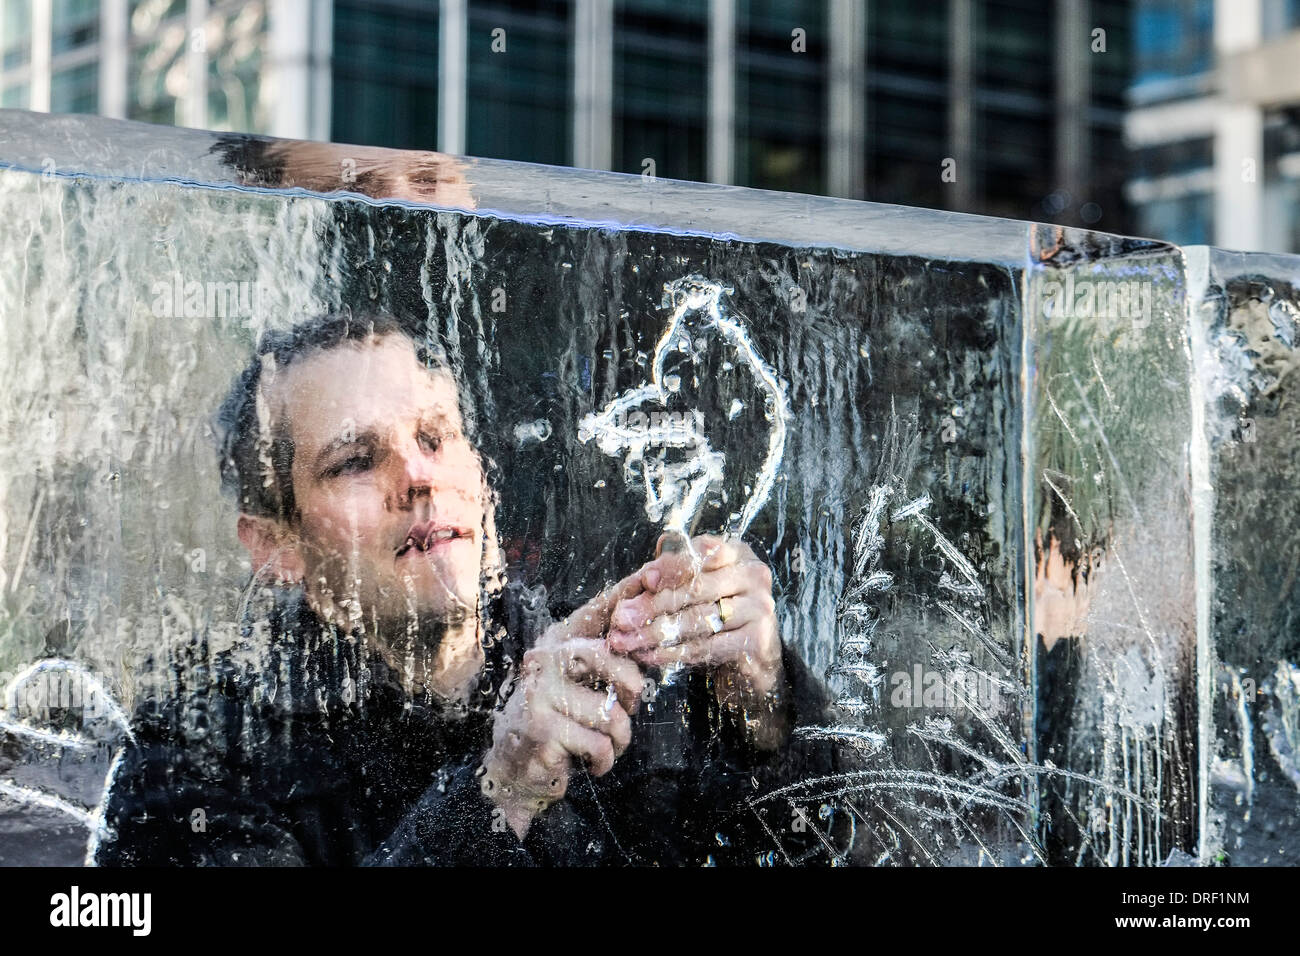 Members of the public trying out ice sculpting as part of the London Ice Sculpture Festival 2014. Stock Photo